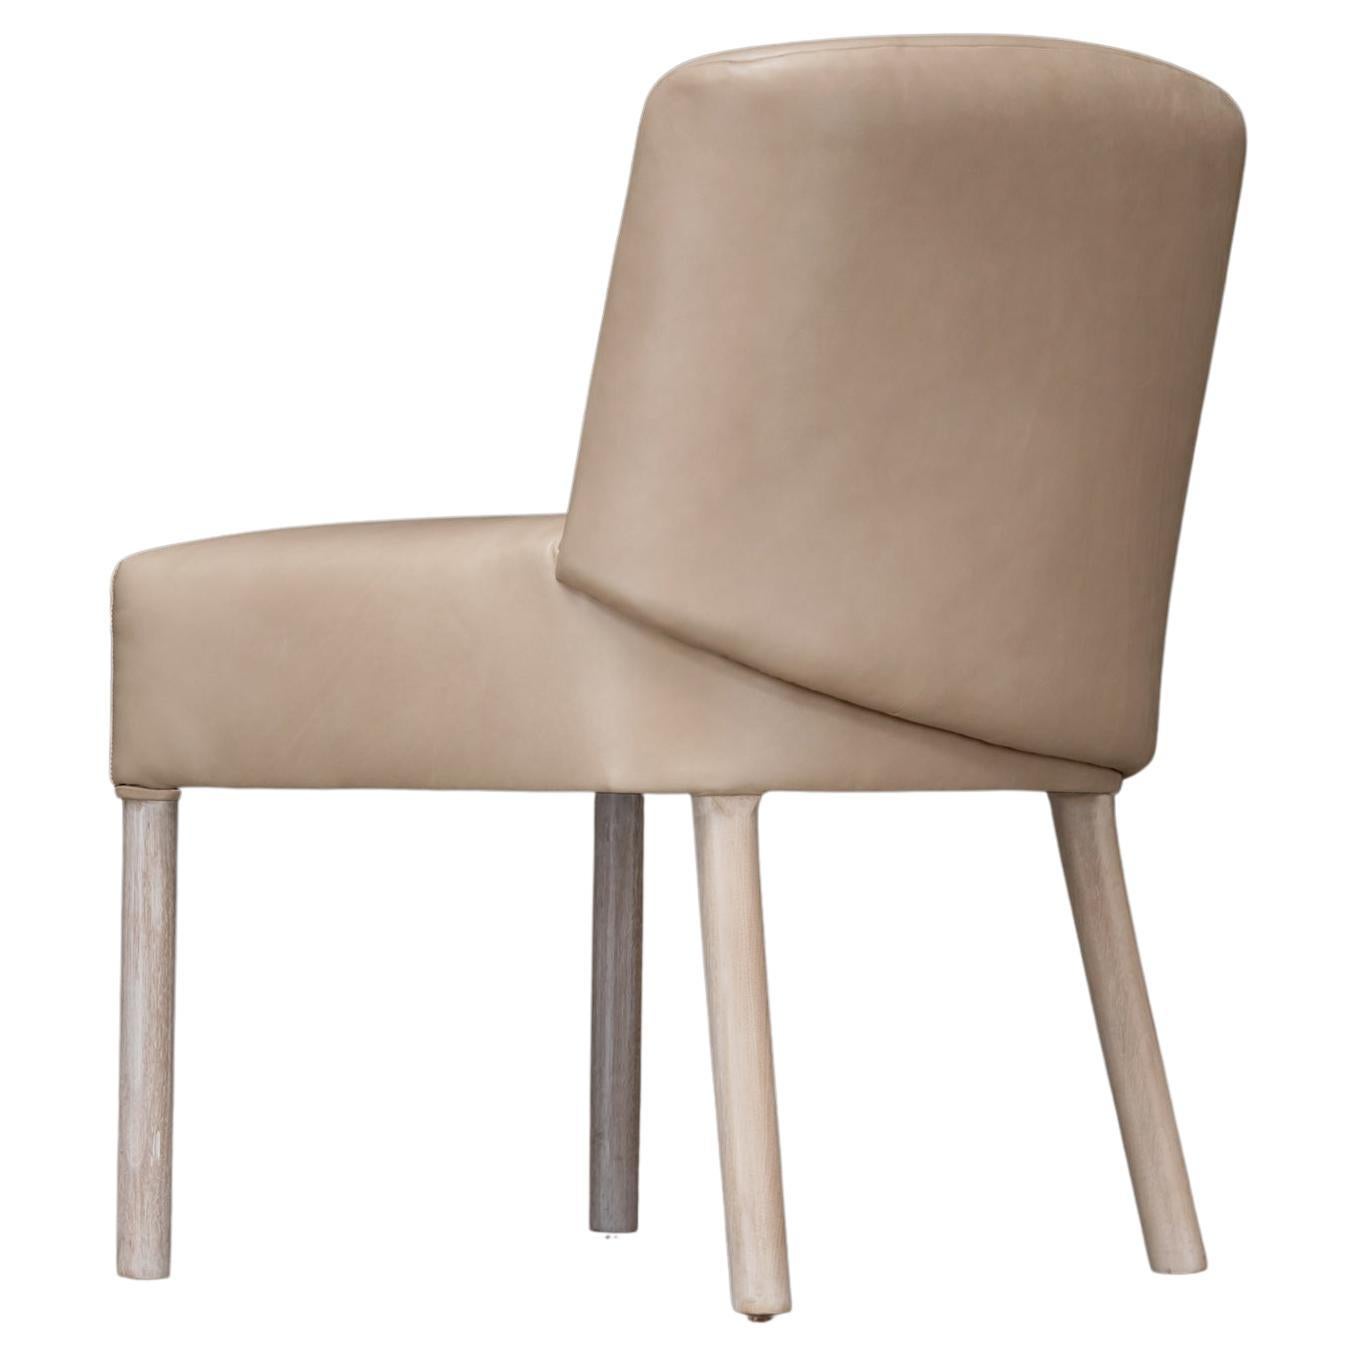 CURVE DINING CHAIR - Modern Sculpted Low Back Design in COM For Sale